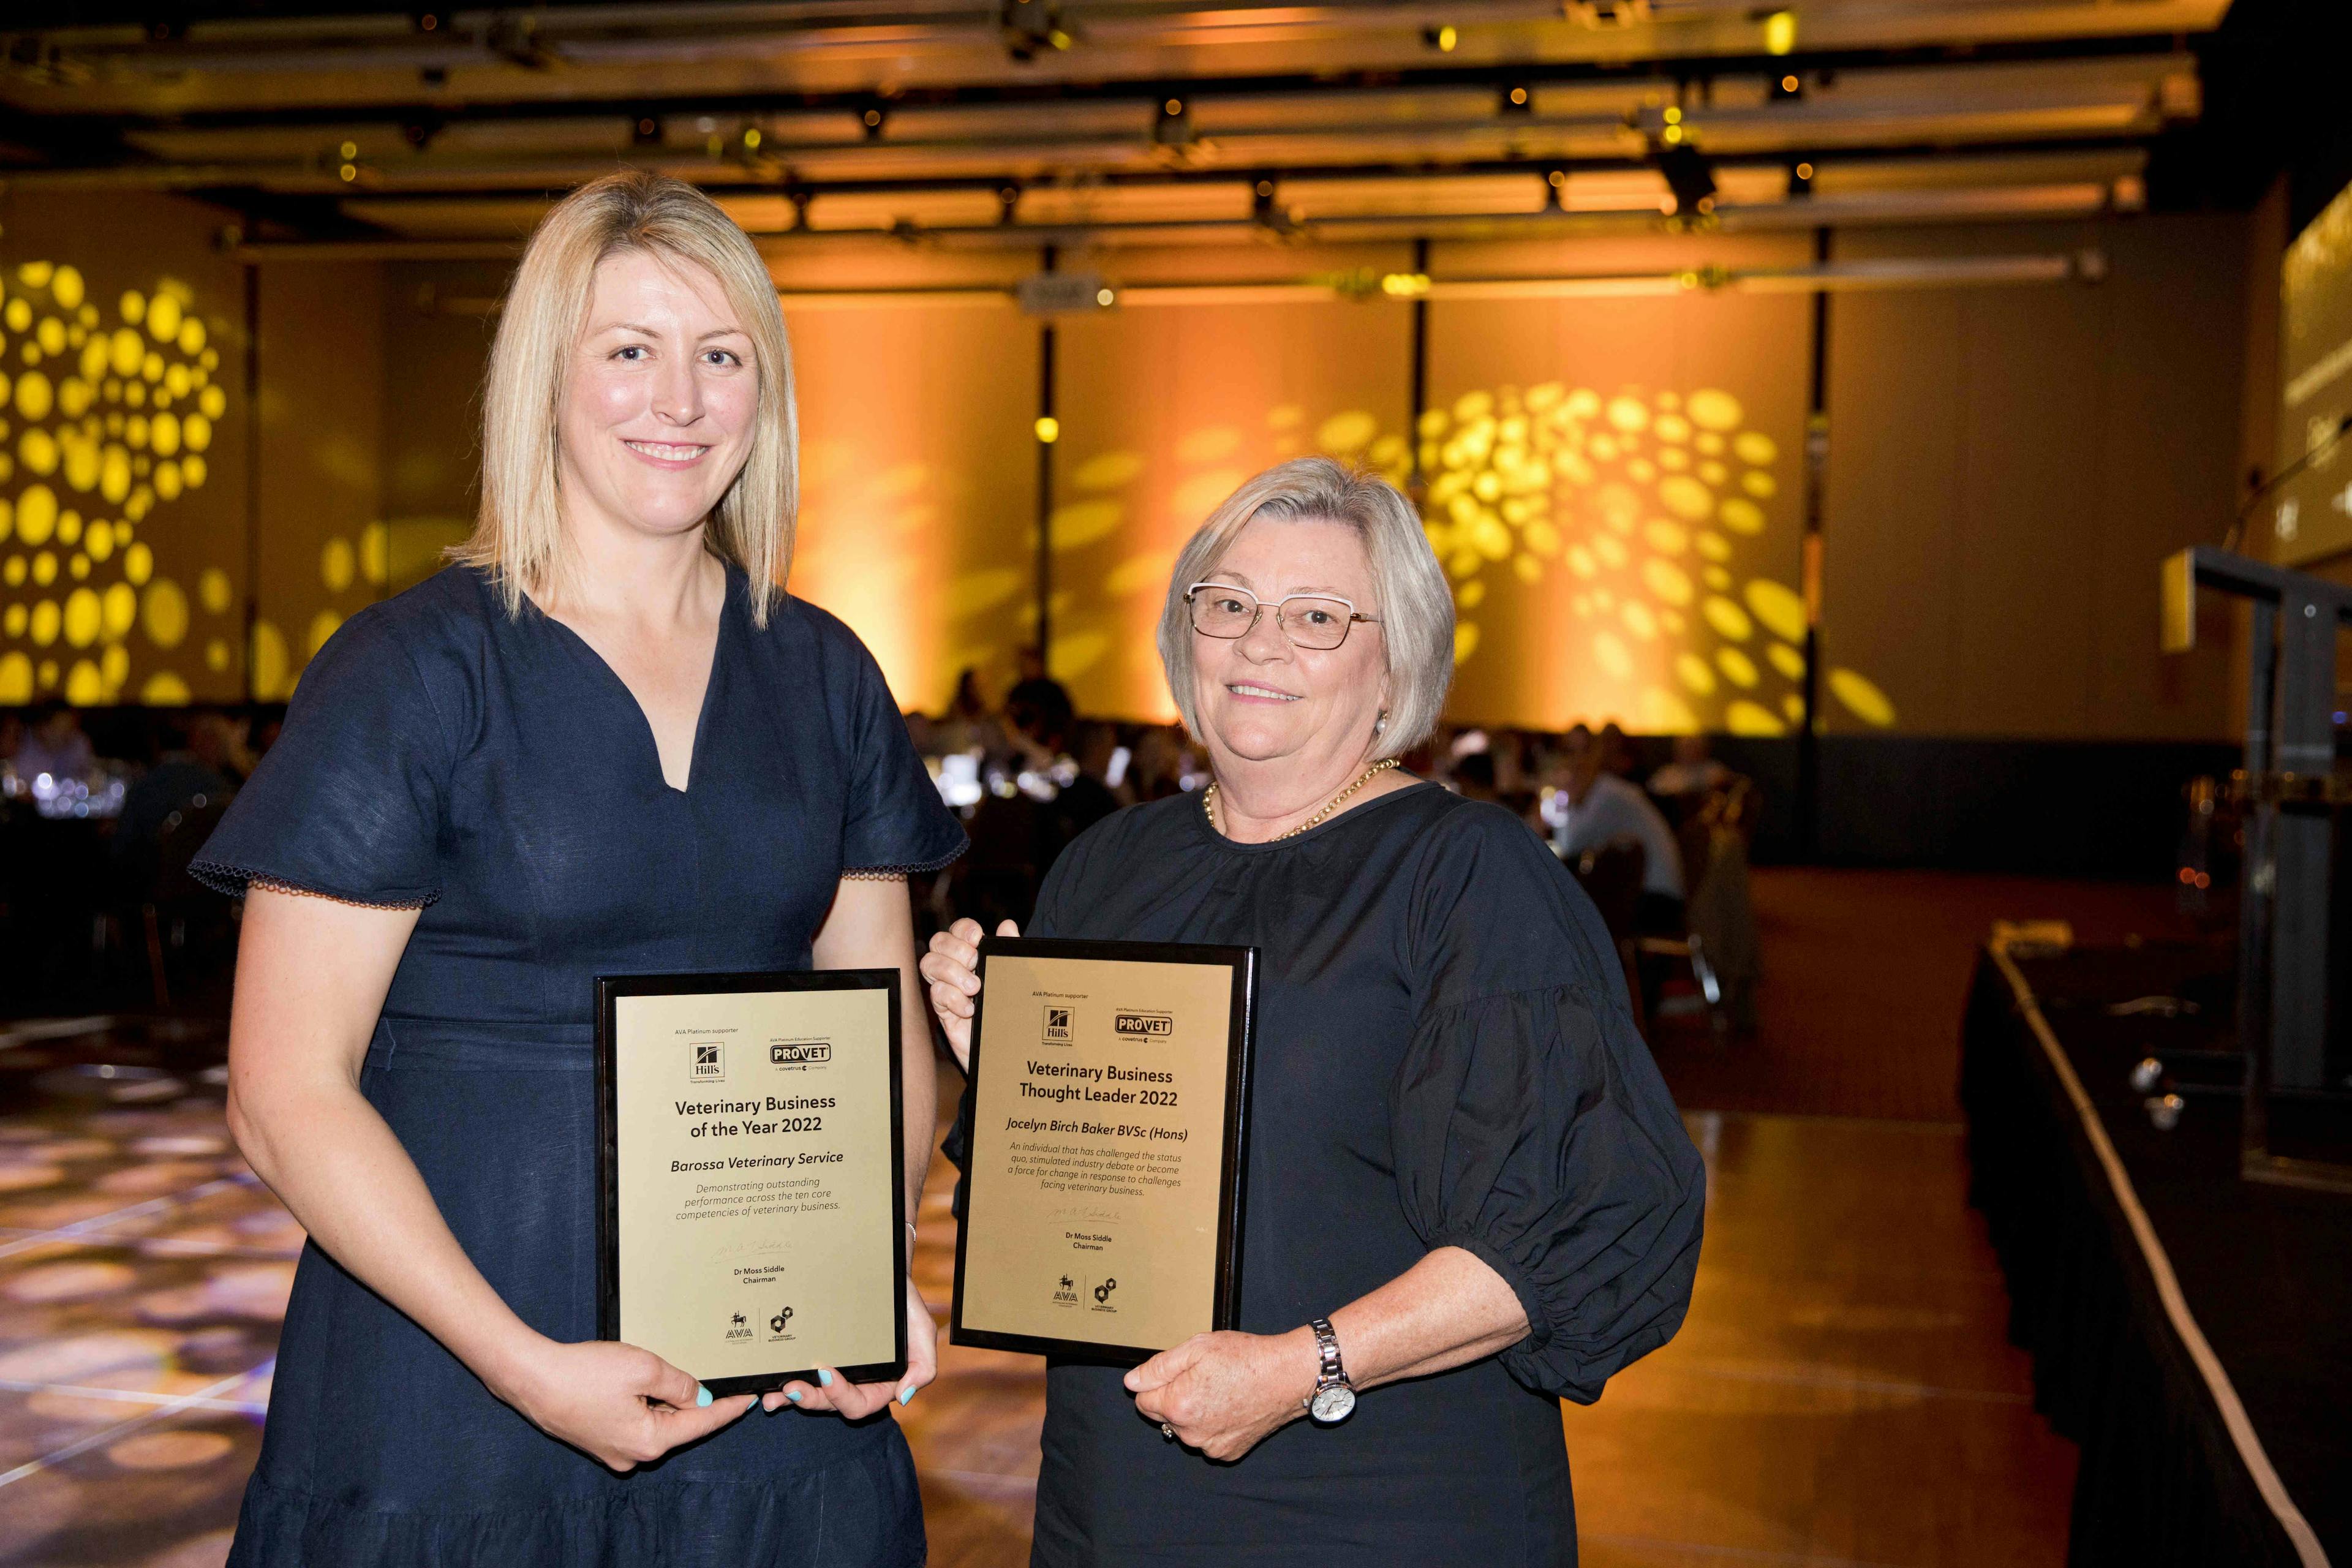 Dr Harper (left), recipient of the VBG Veterinary Business of the Year 2022 award; and Dr Birch Baker (right), recipient of the VBG Veterinary Business Thought Leader 2022 award  (Photo courtesy of AVA). 